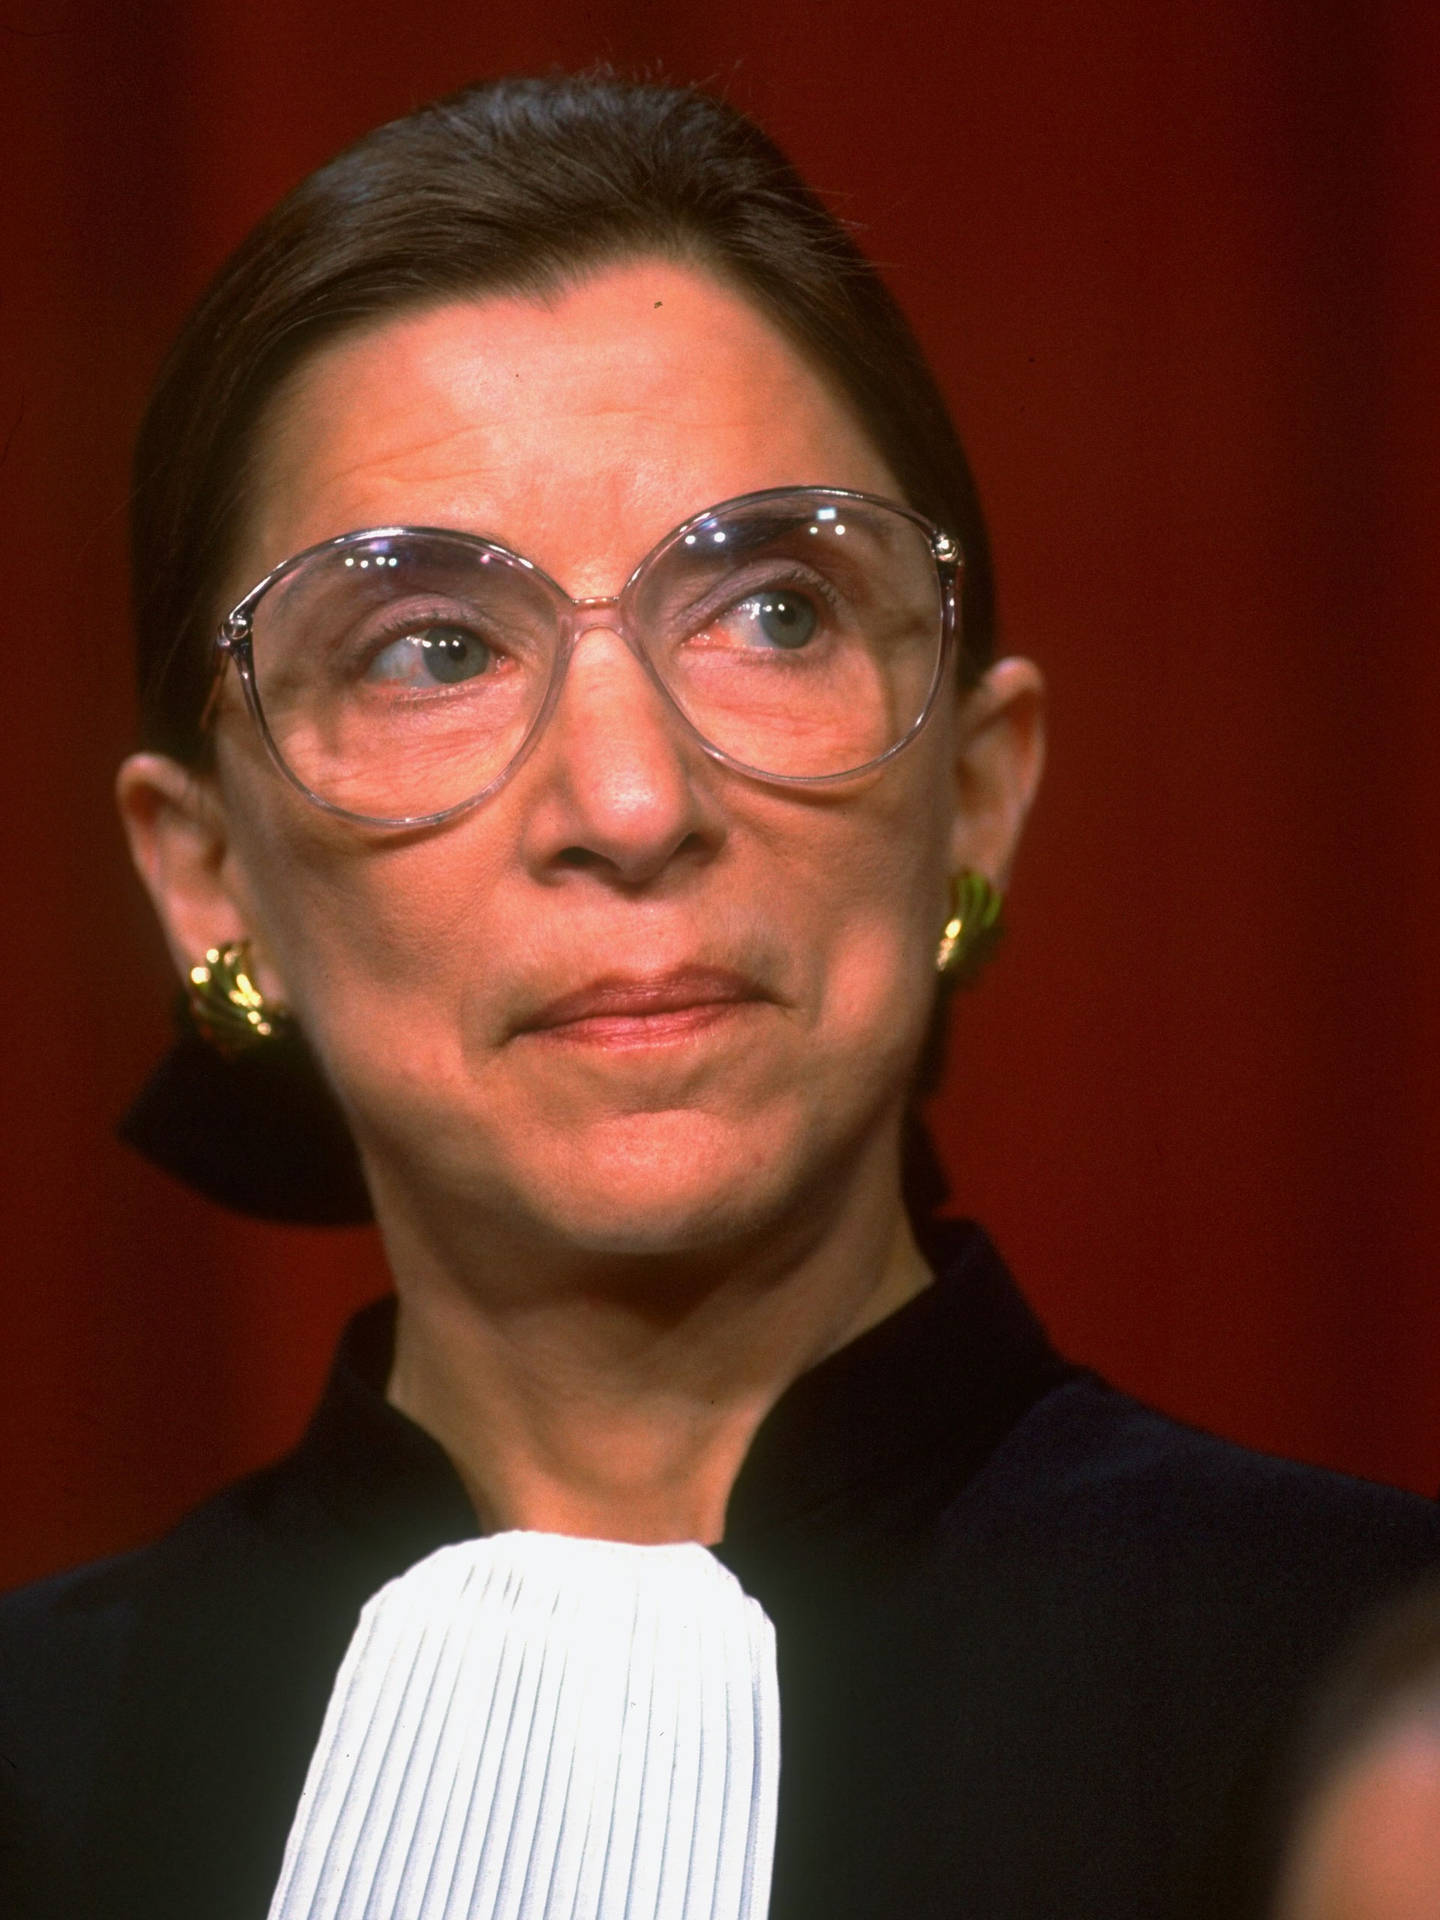 Caption: Ruth Bader Ginsburg - Champion Of Equality And Justice Background